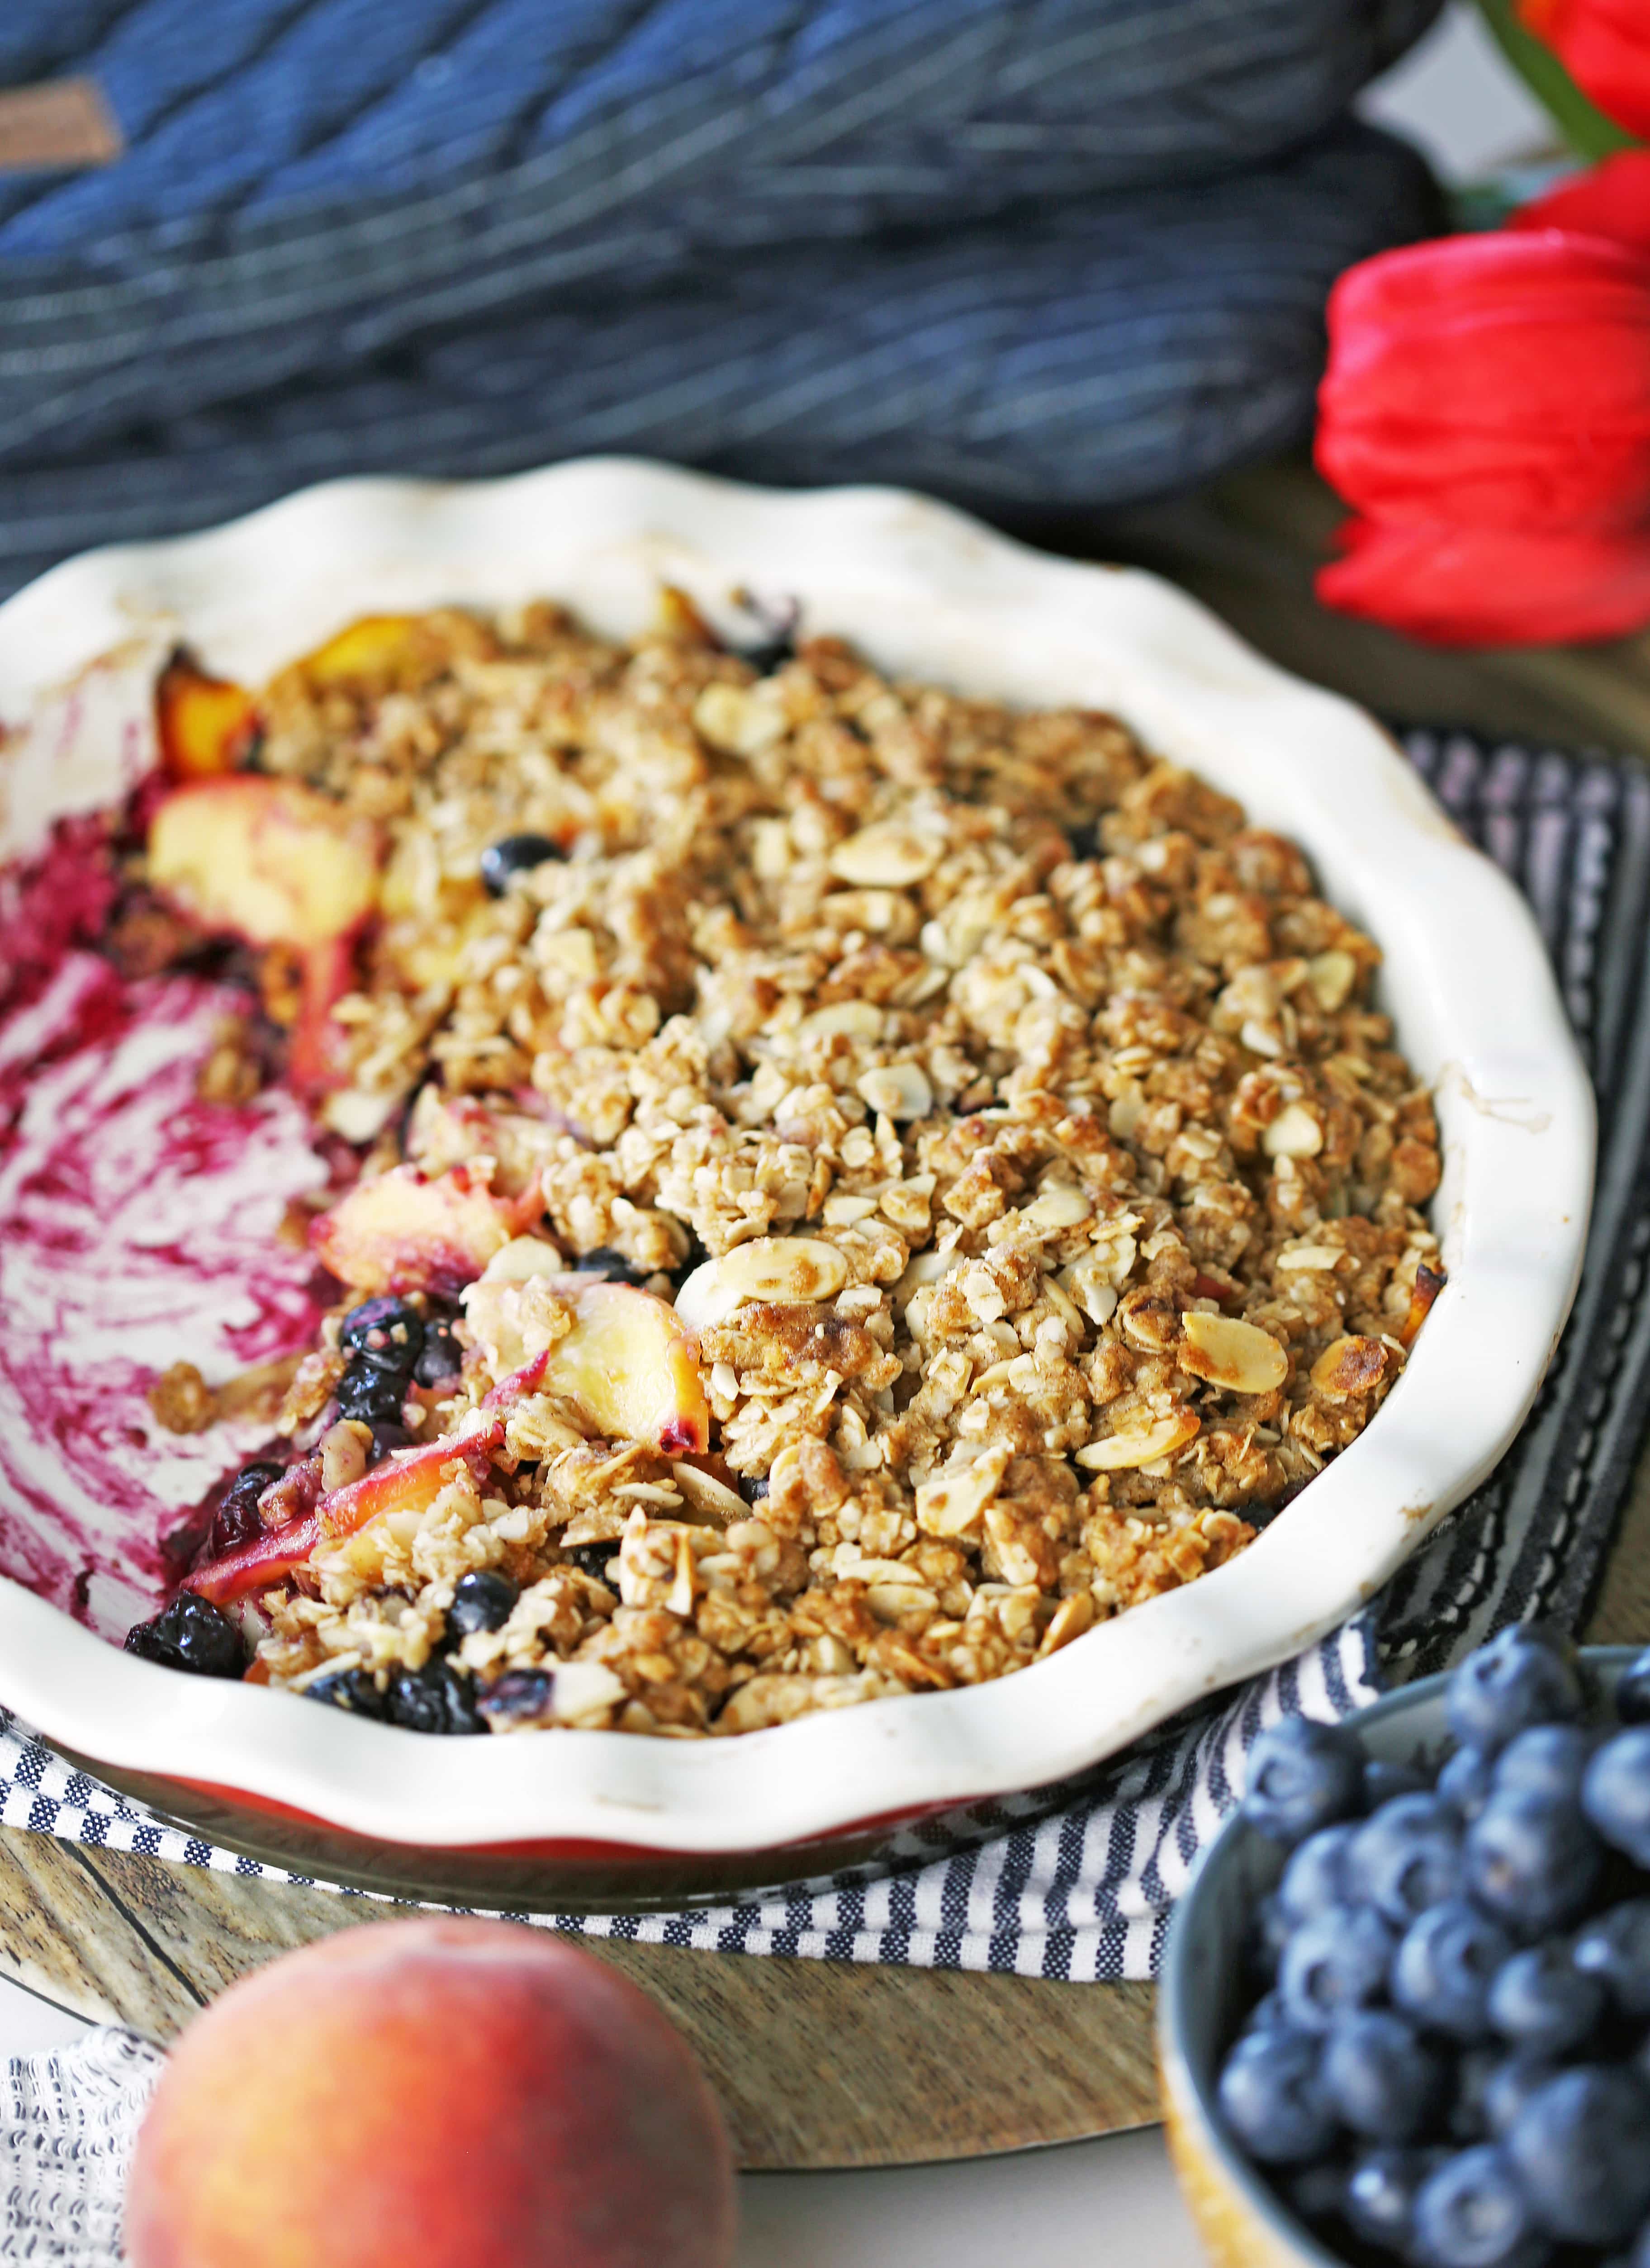 A white and red pie dish containing blueberry peach crisp with a scoop of crisp removed.